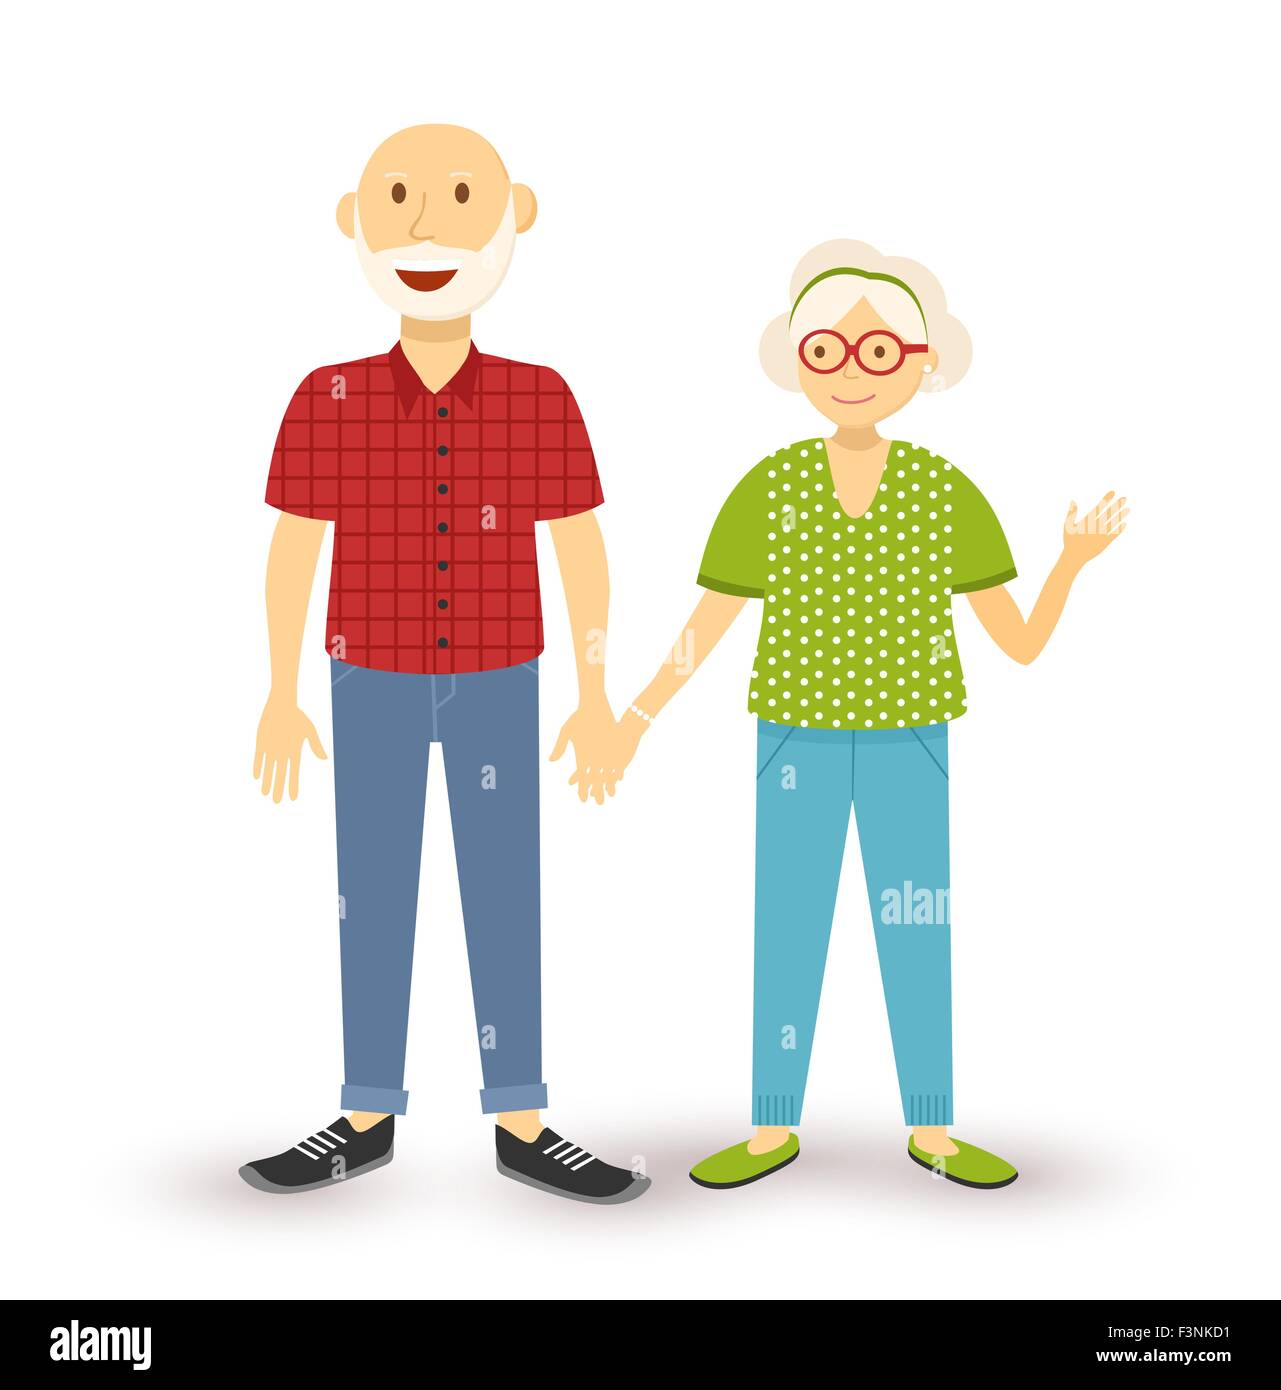 People collection: happy old elder grandparent couple with grandfather and grandmother in flat style illustration. EPS10 vector. Stock Vector